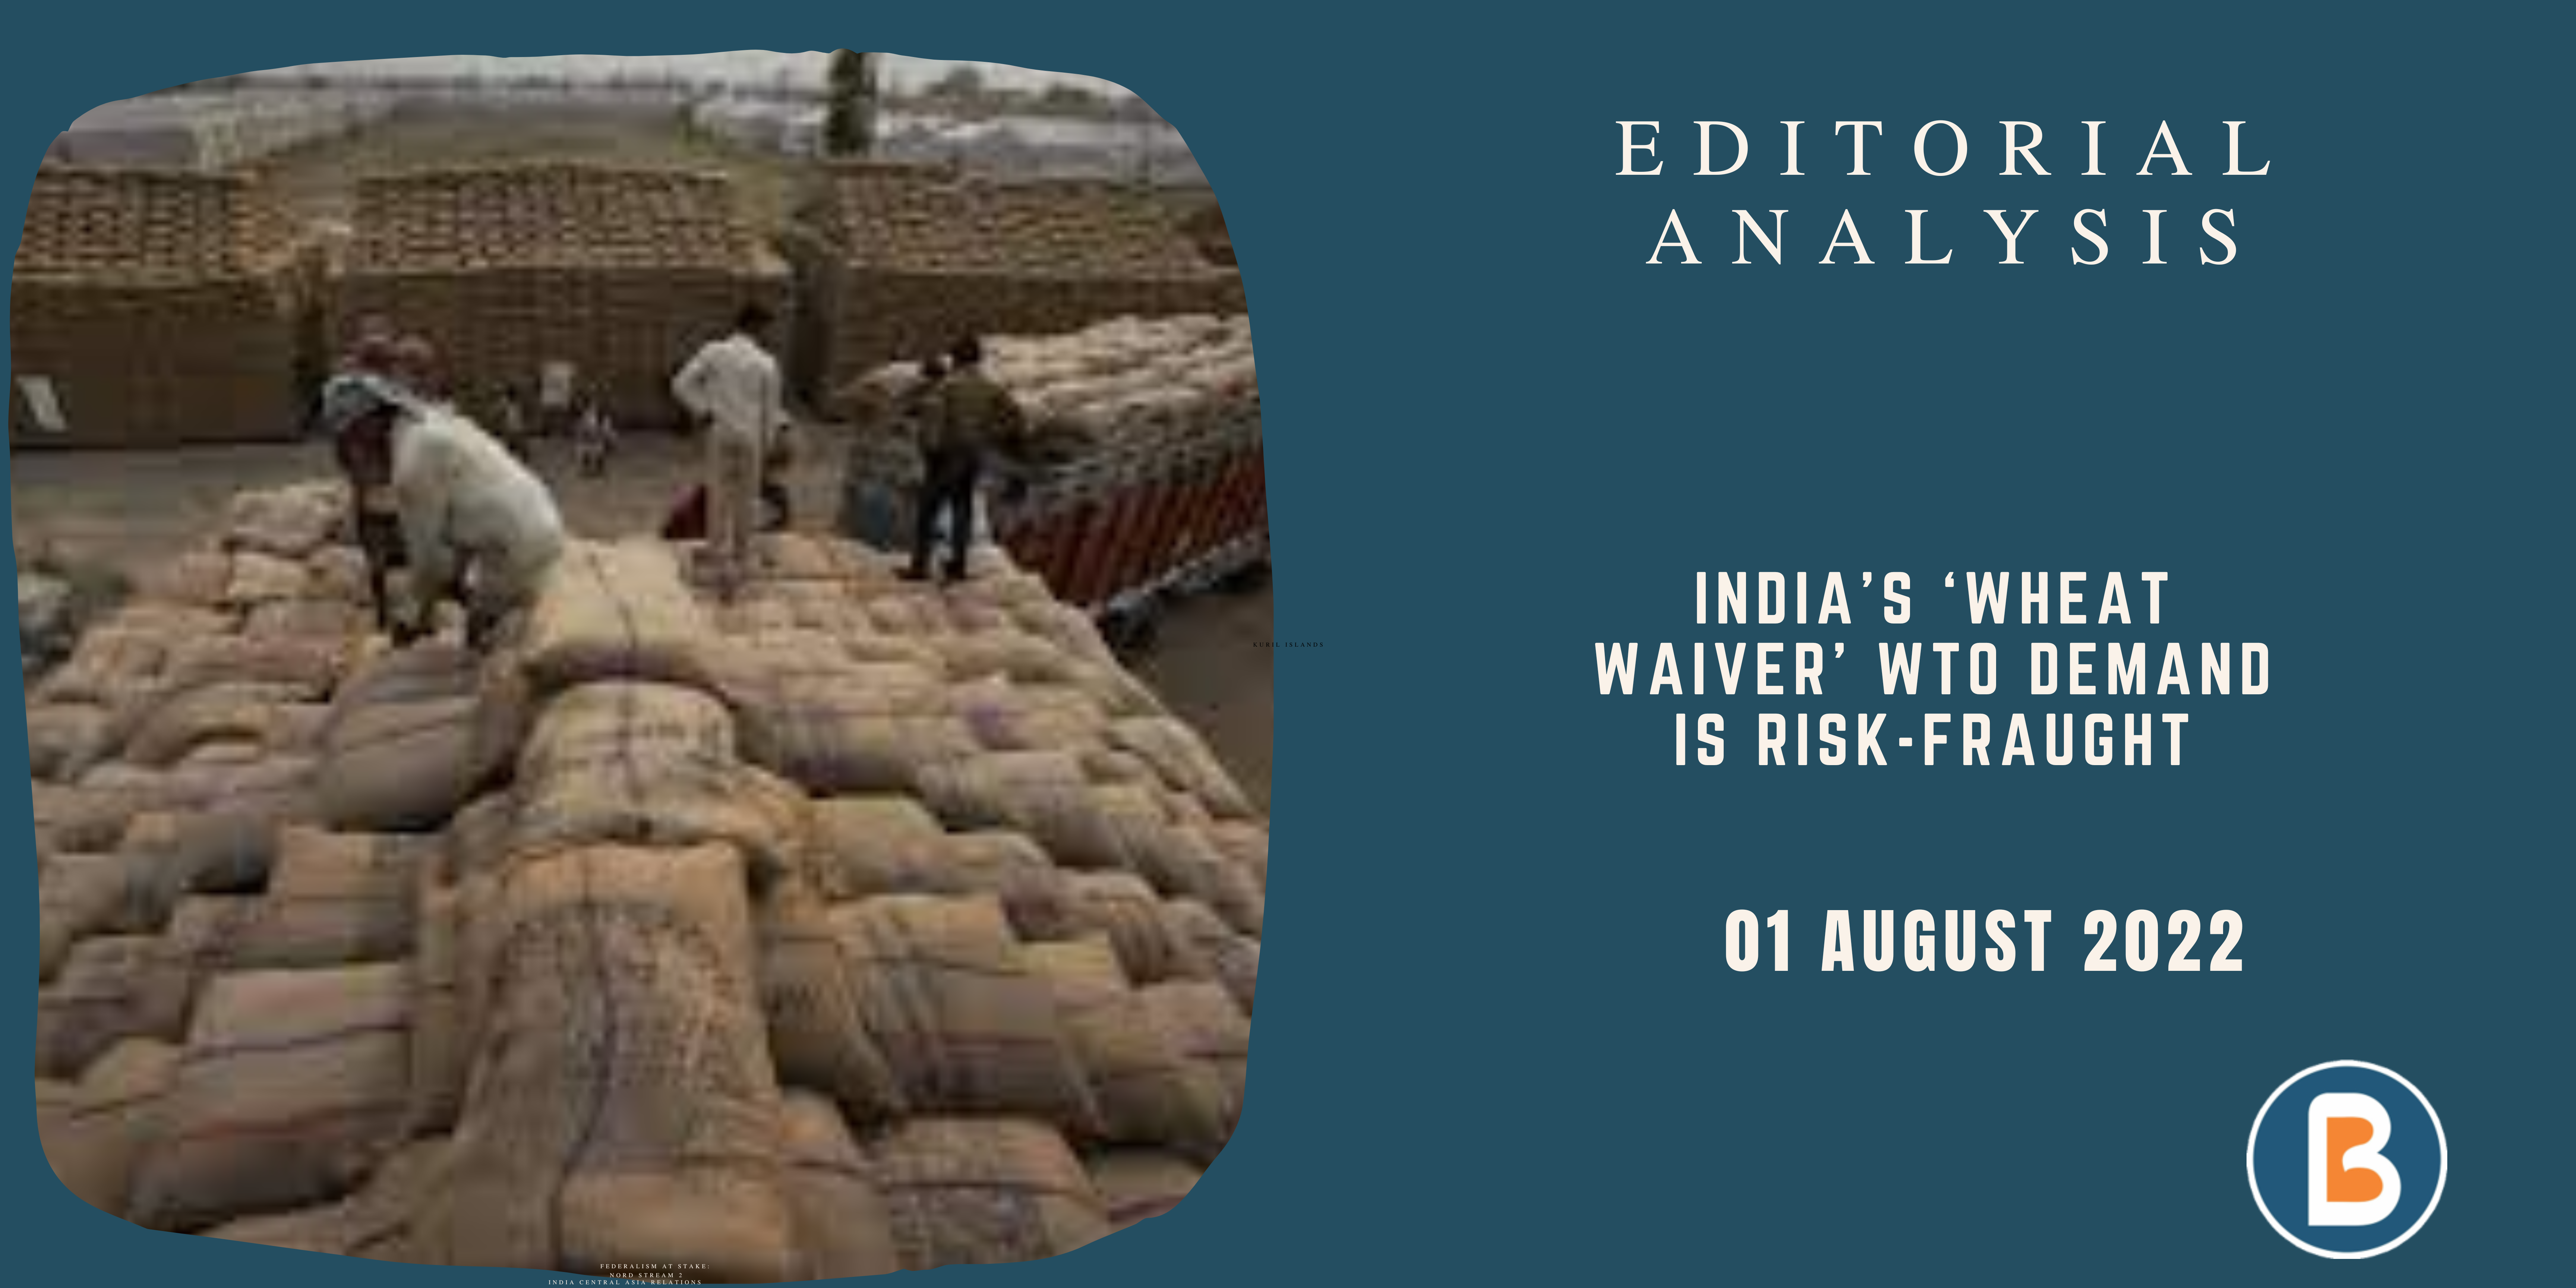 Editorial Analysis for Civil Services - India’s ‘wheat waiver’ WTO Demand is Risk-Fraught